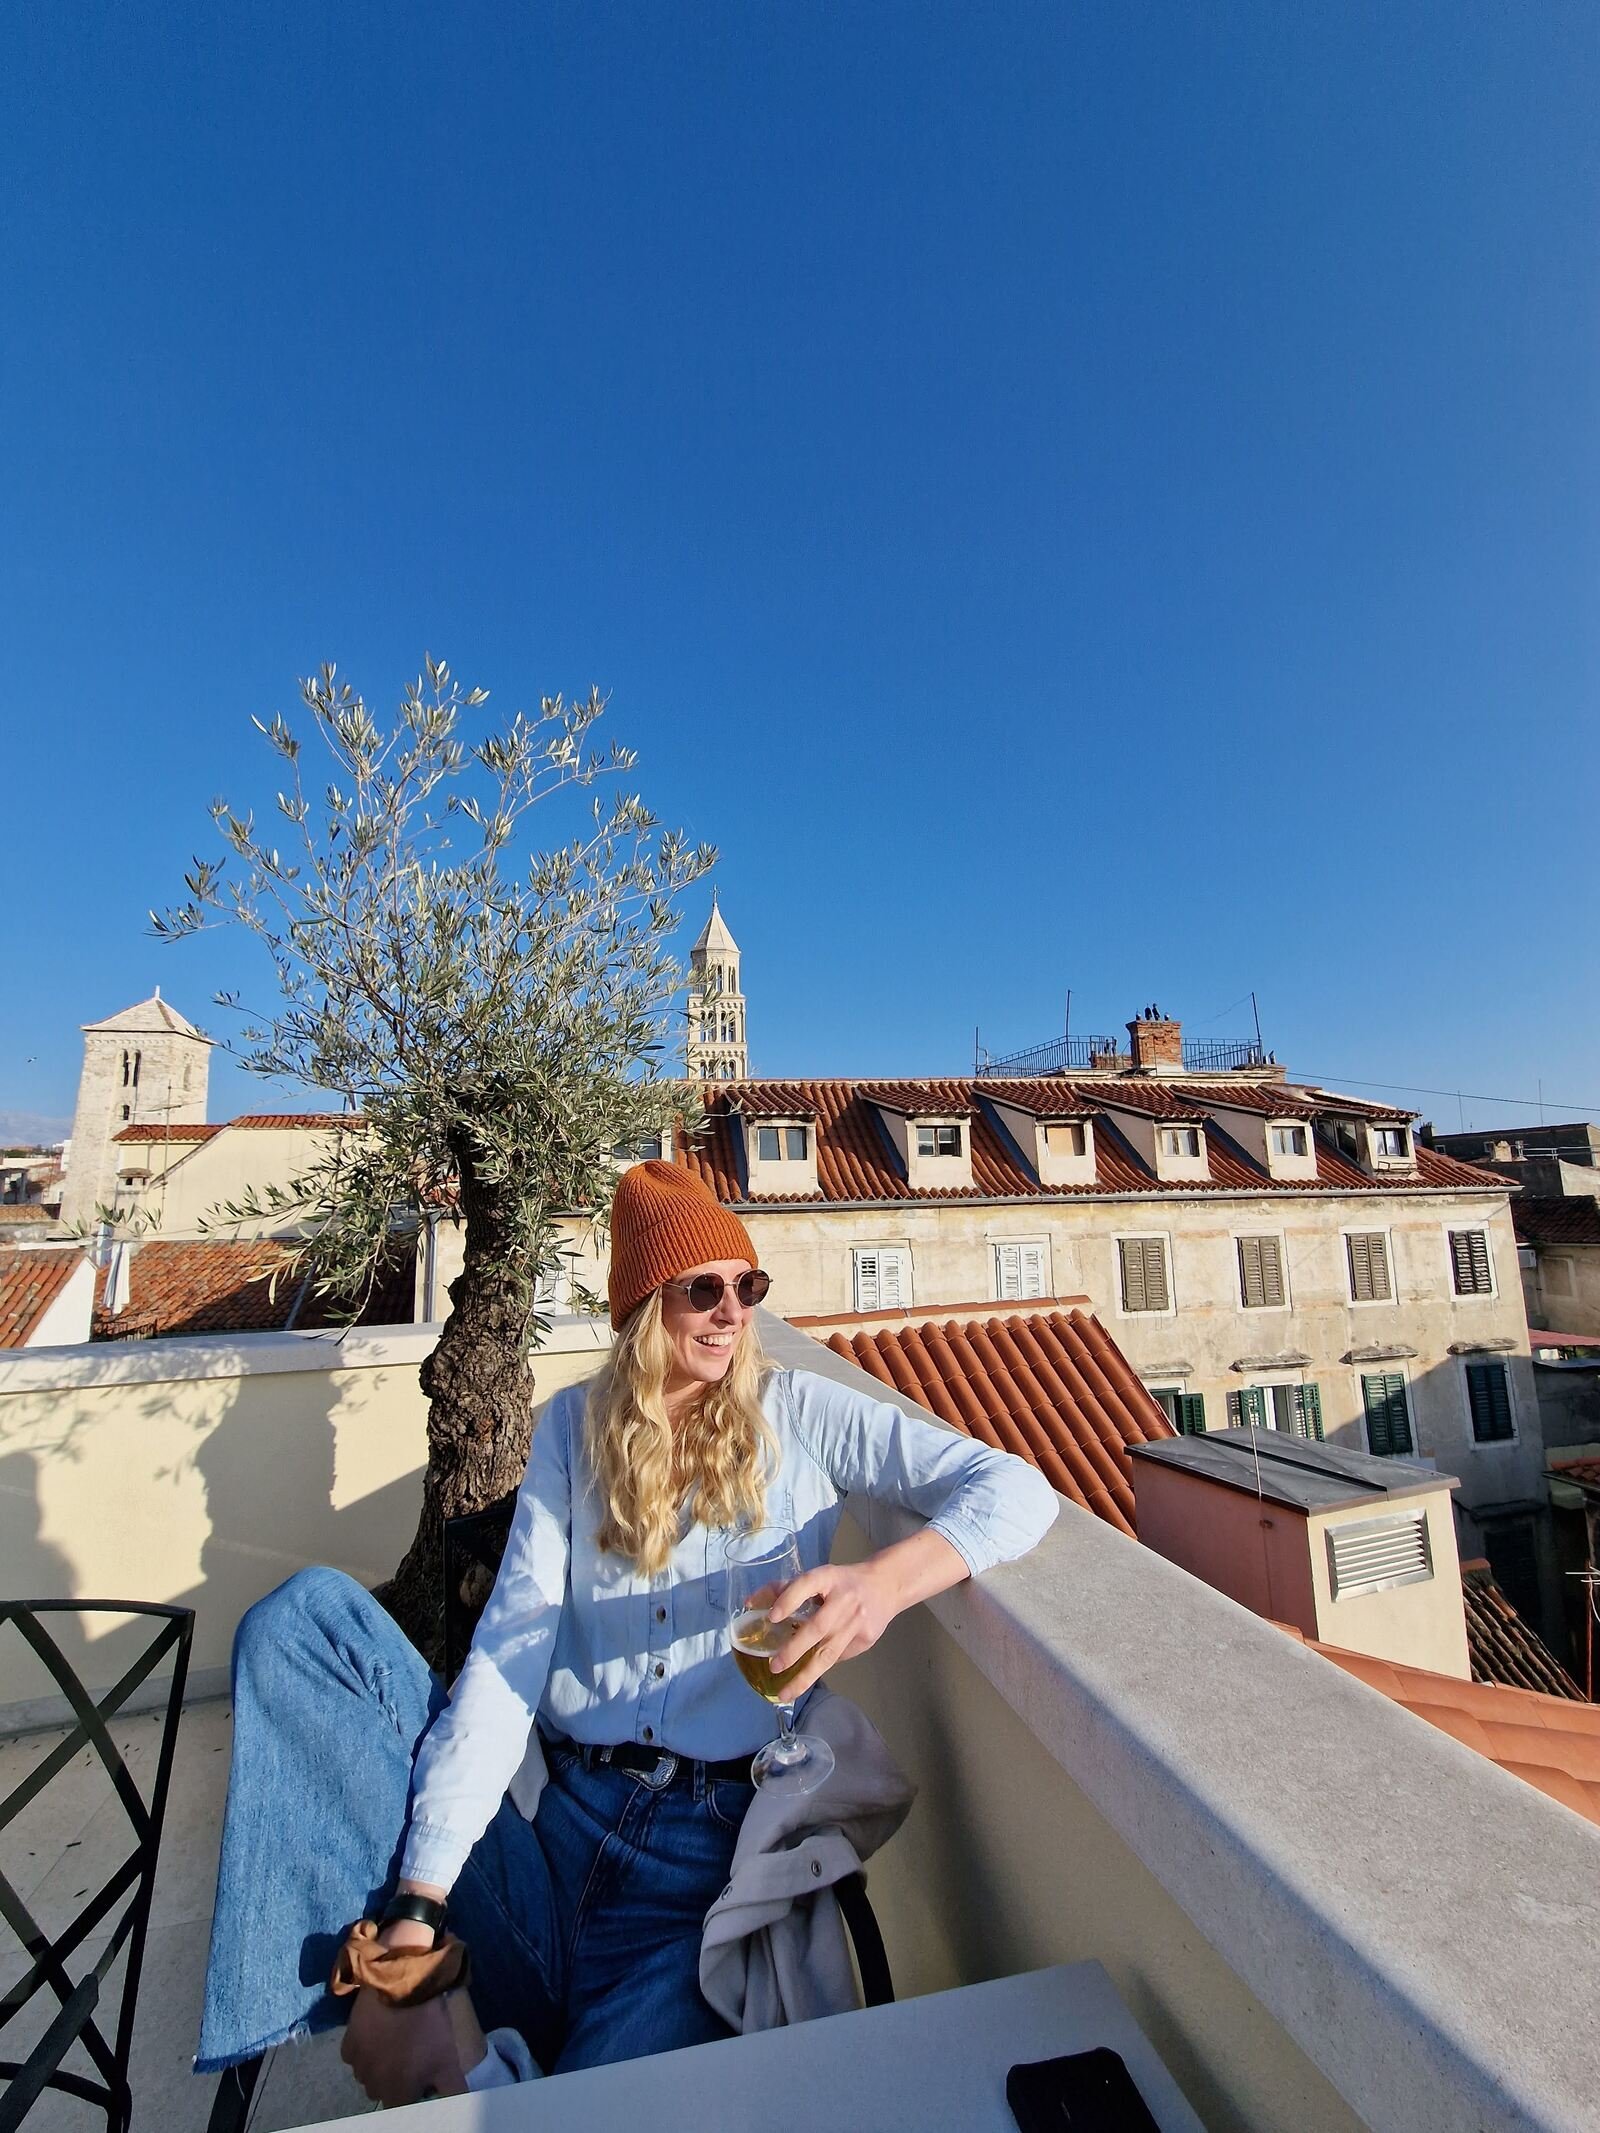 Woman in a blue shirt and denim jeans, holding a beer and leaning on a low wall on a rooftop with views of old houses and terracotta roofs around her